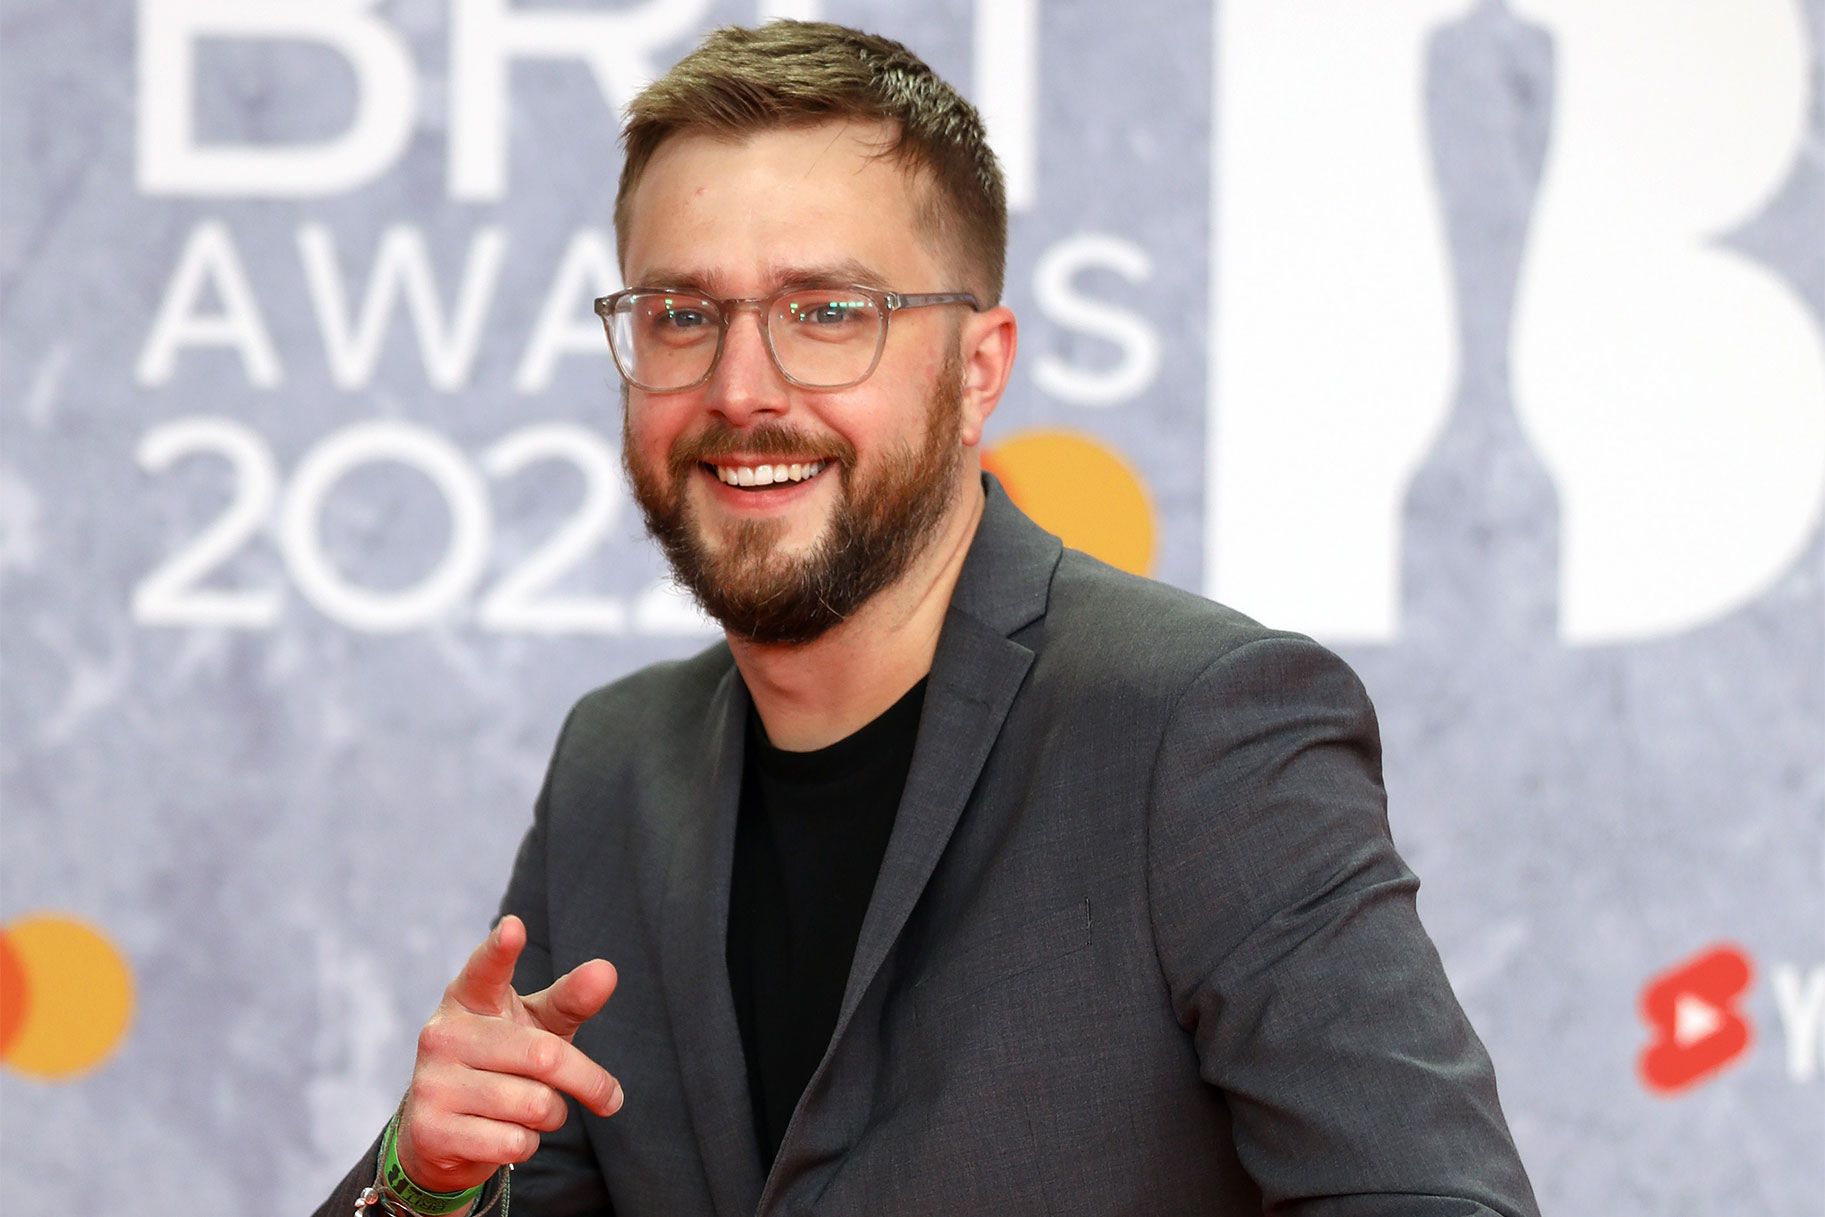 25 Intriguing Facts About Iain Stirling - Facts.net